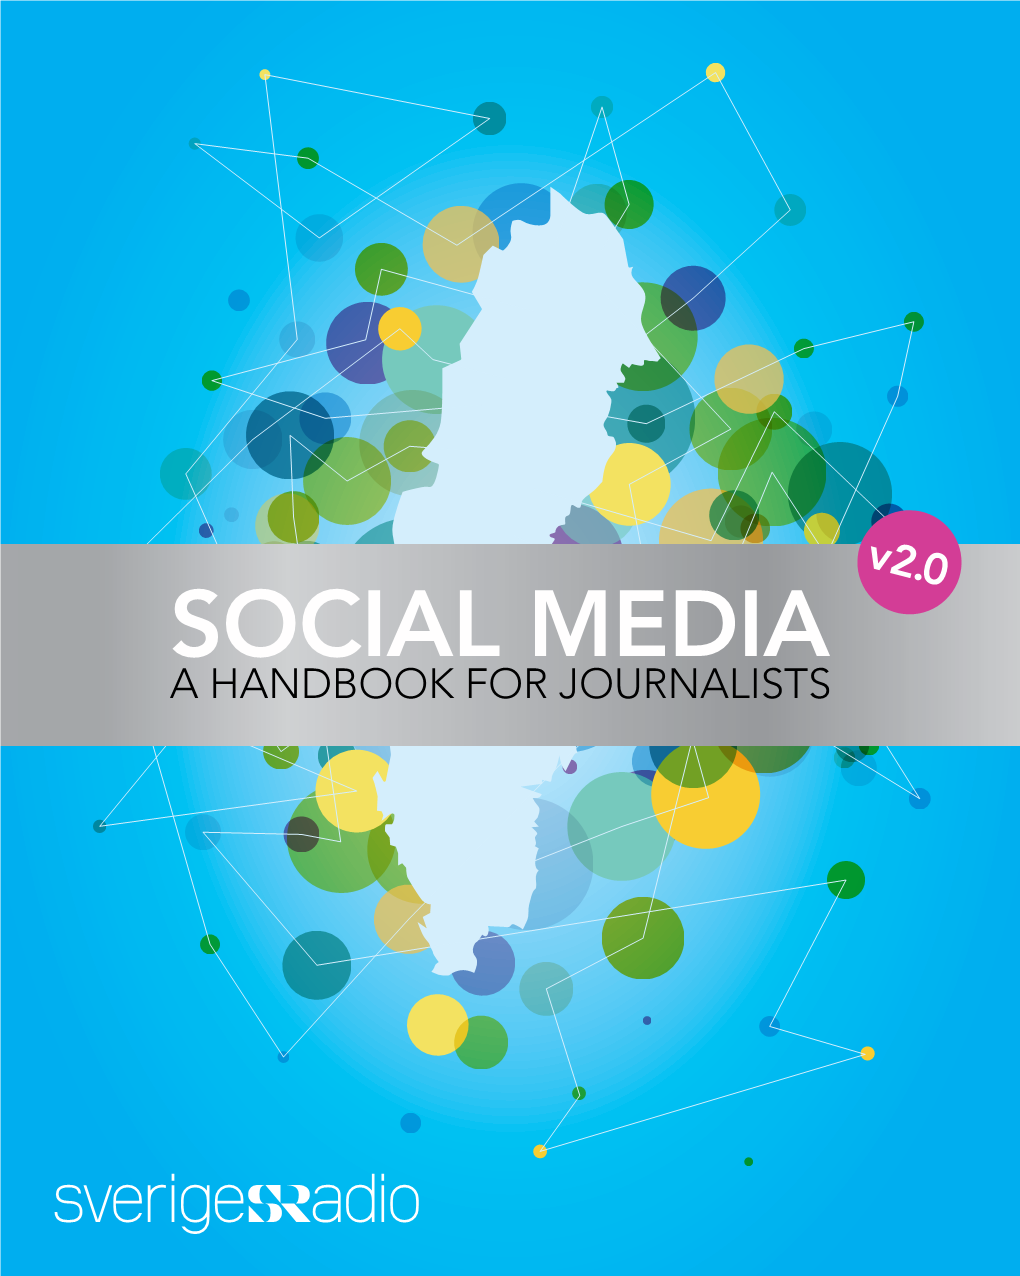 SOCIAL MEDIA a HANDBOOK for JOURNALISTS 2 "Swedish Radio Will Work with Diversity Within Its Programming